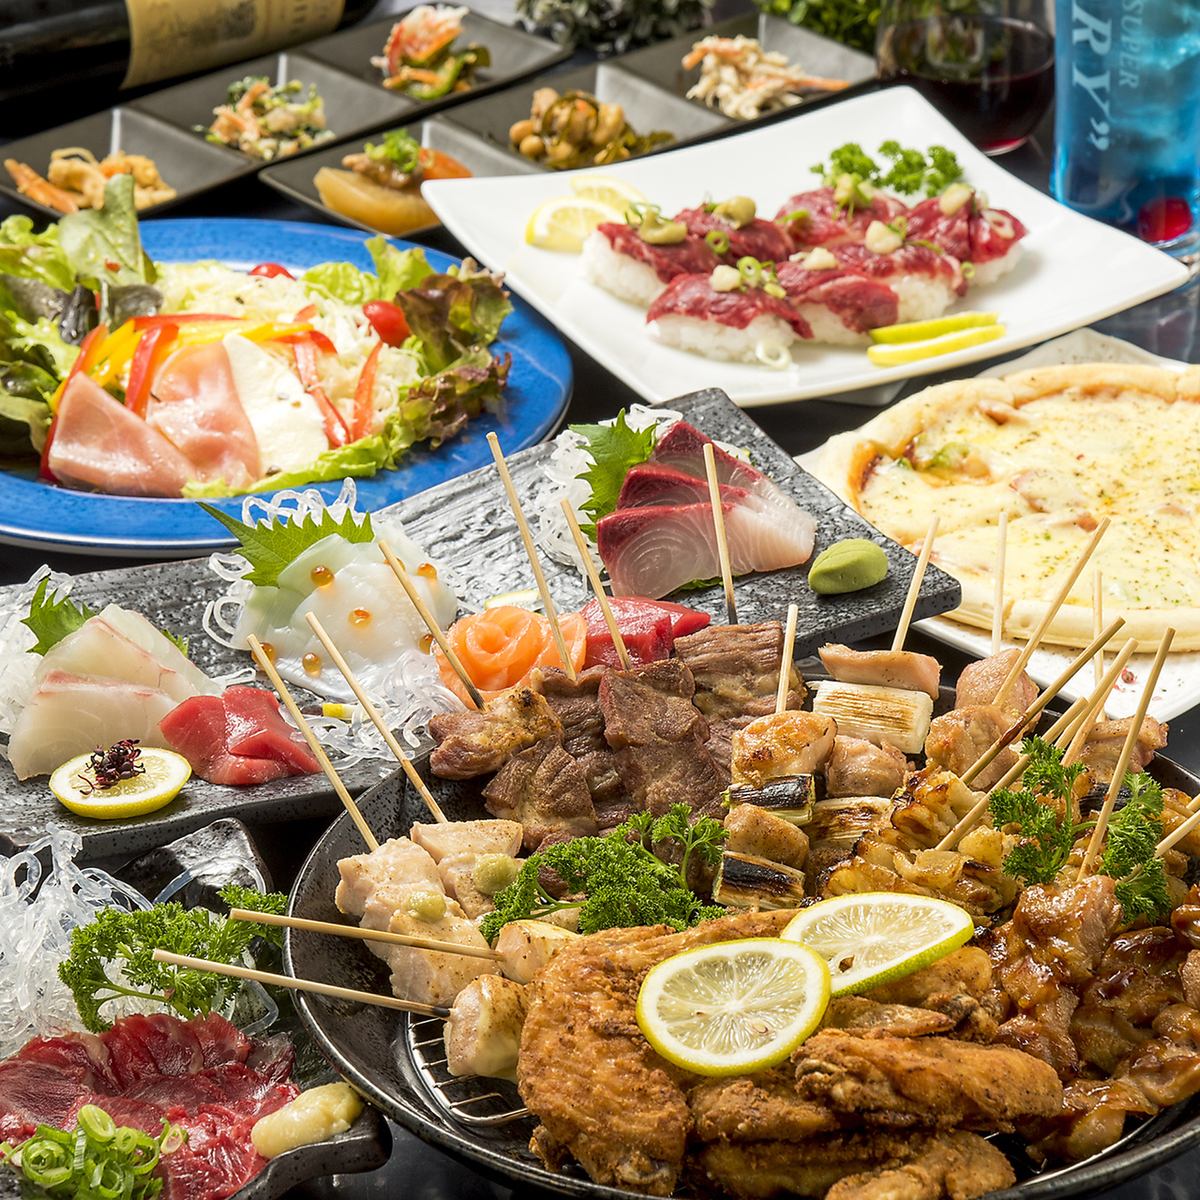 A wide variety of meat, seafood, and single dishes ◎ Courses perfect for girls-only gatherings and banquets ◎